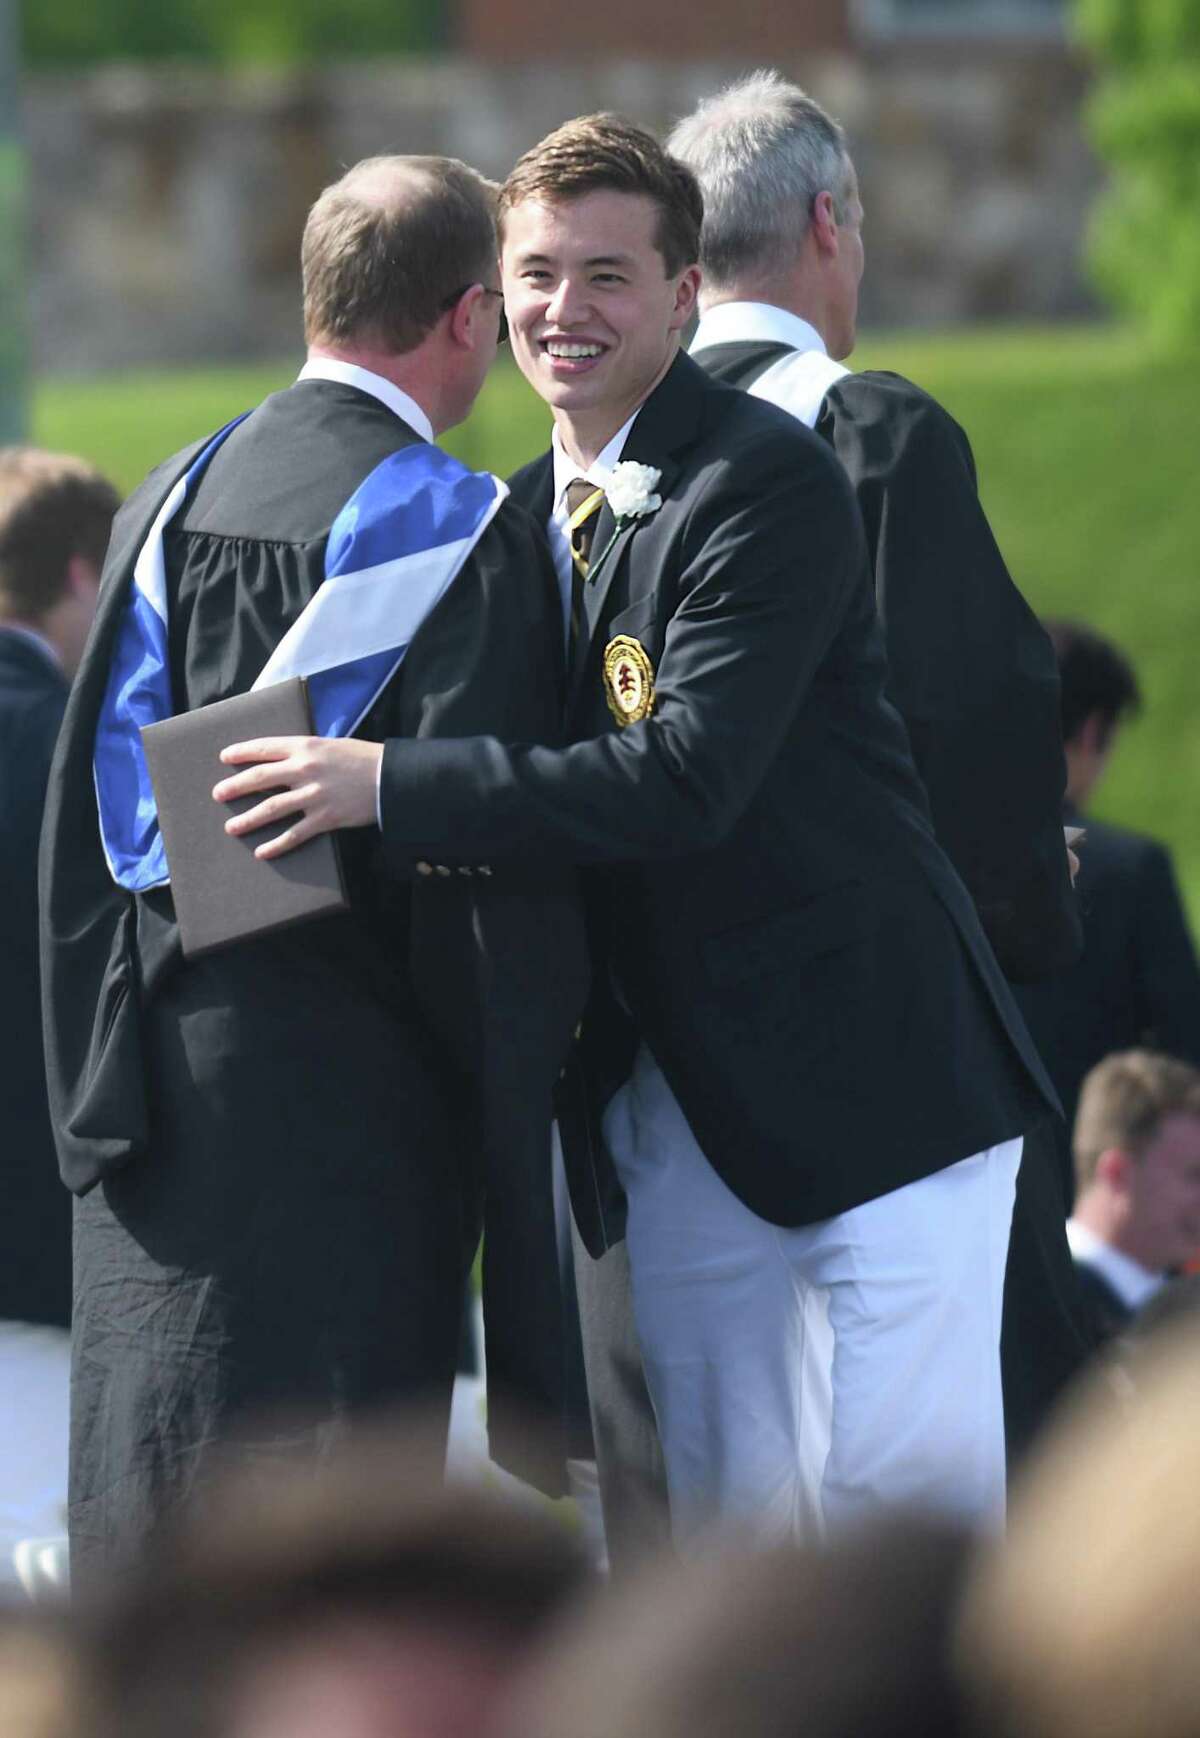 Jack Moore receives his diploma at the Brunswick School 120th Commencement at Brunwick's Lower School Campus in Greenwich, Conn. Wednesday, May 18, 2022.